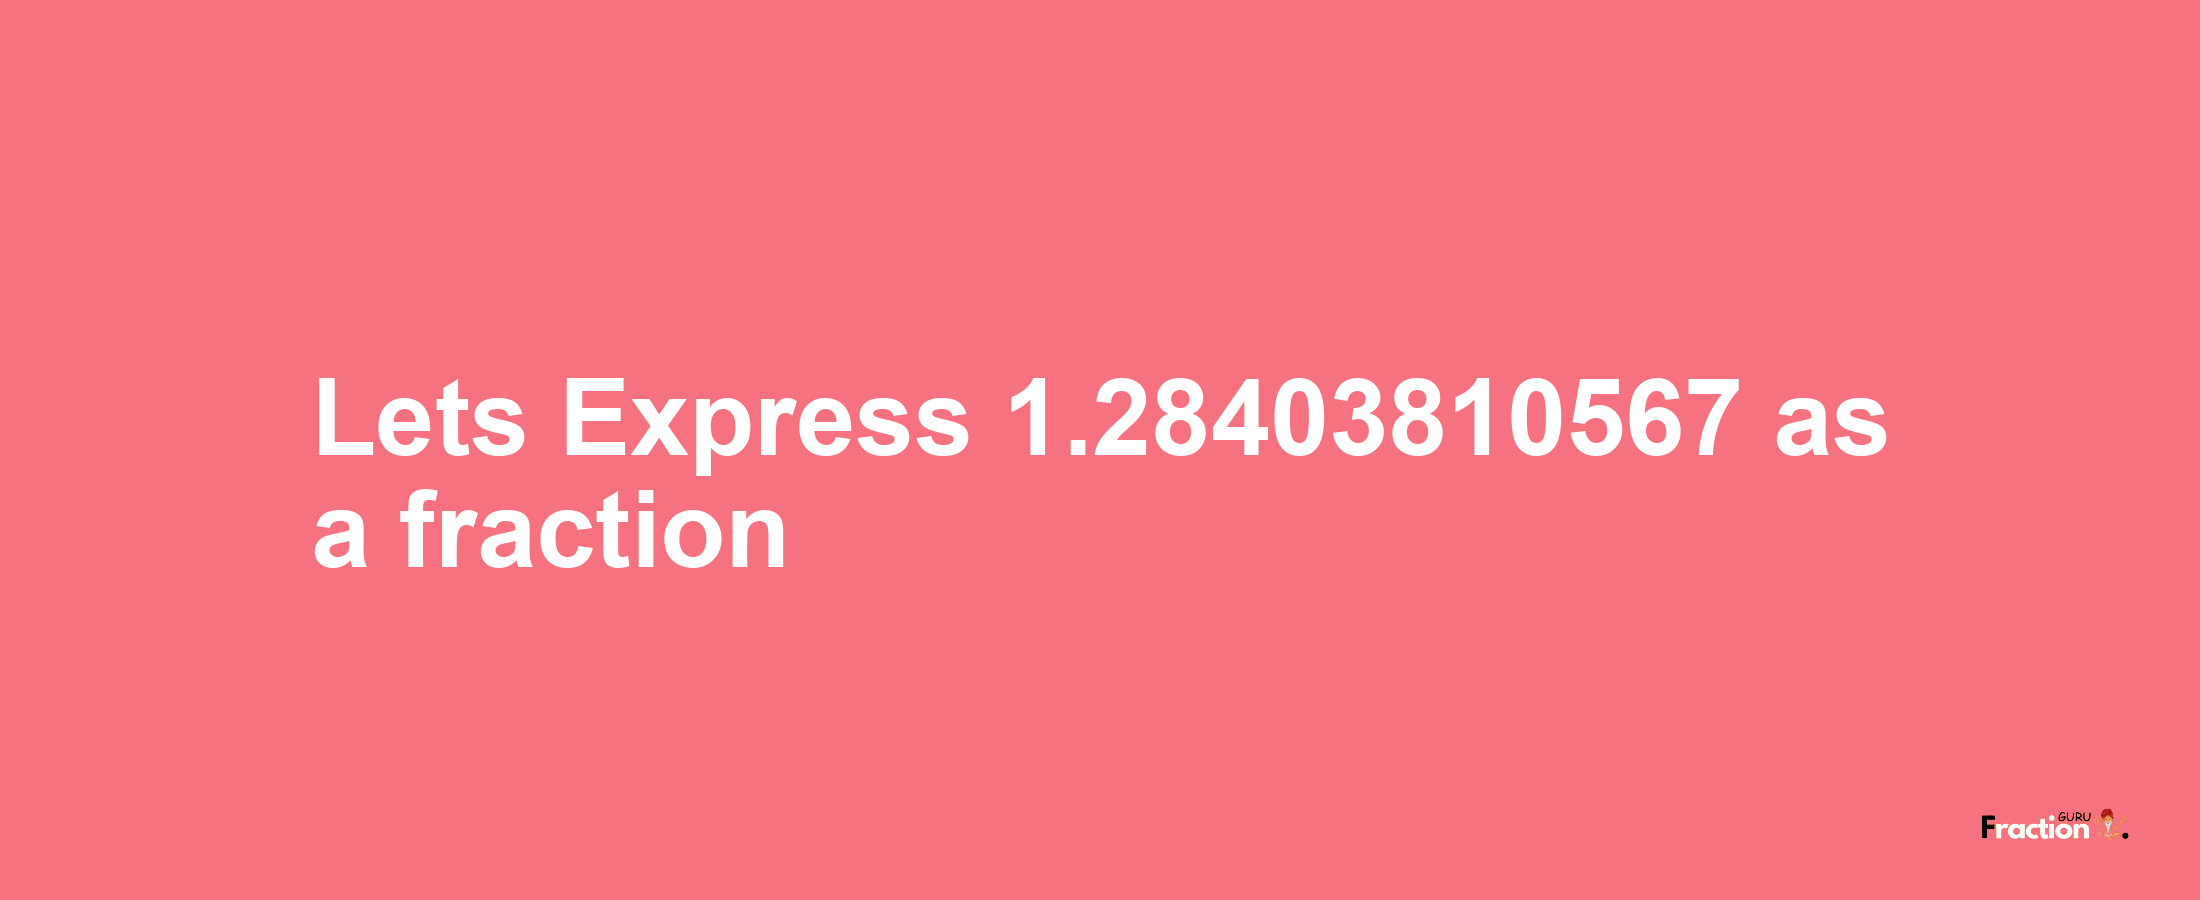 Lets Express 1.28403810567 as afraction